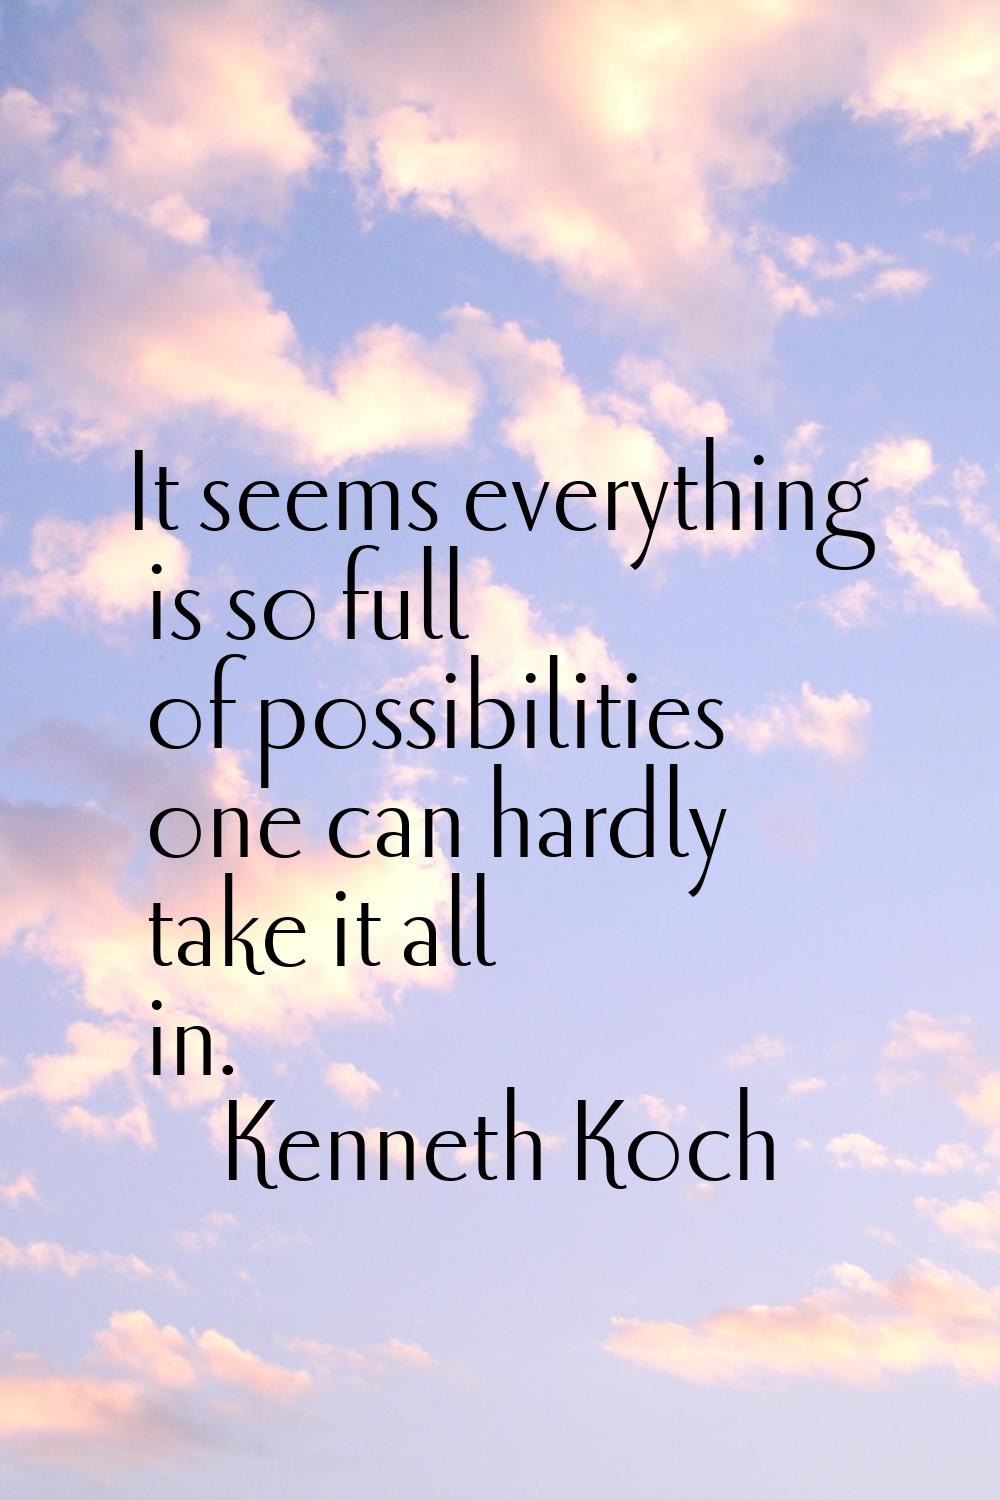 It seems everything is so full of possibilities one can hardly take it all in.